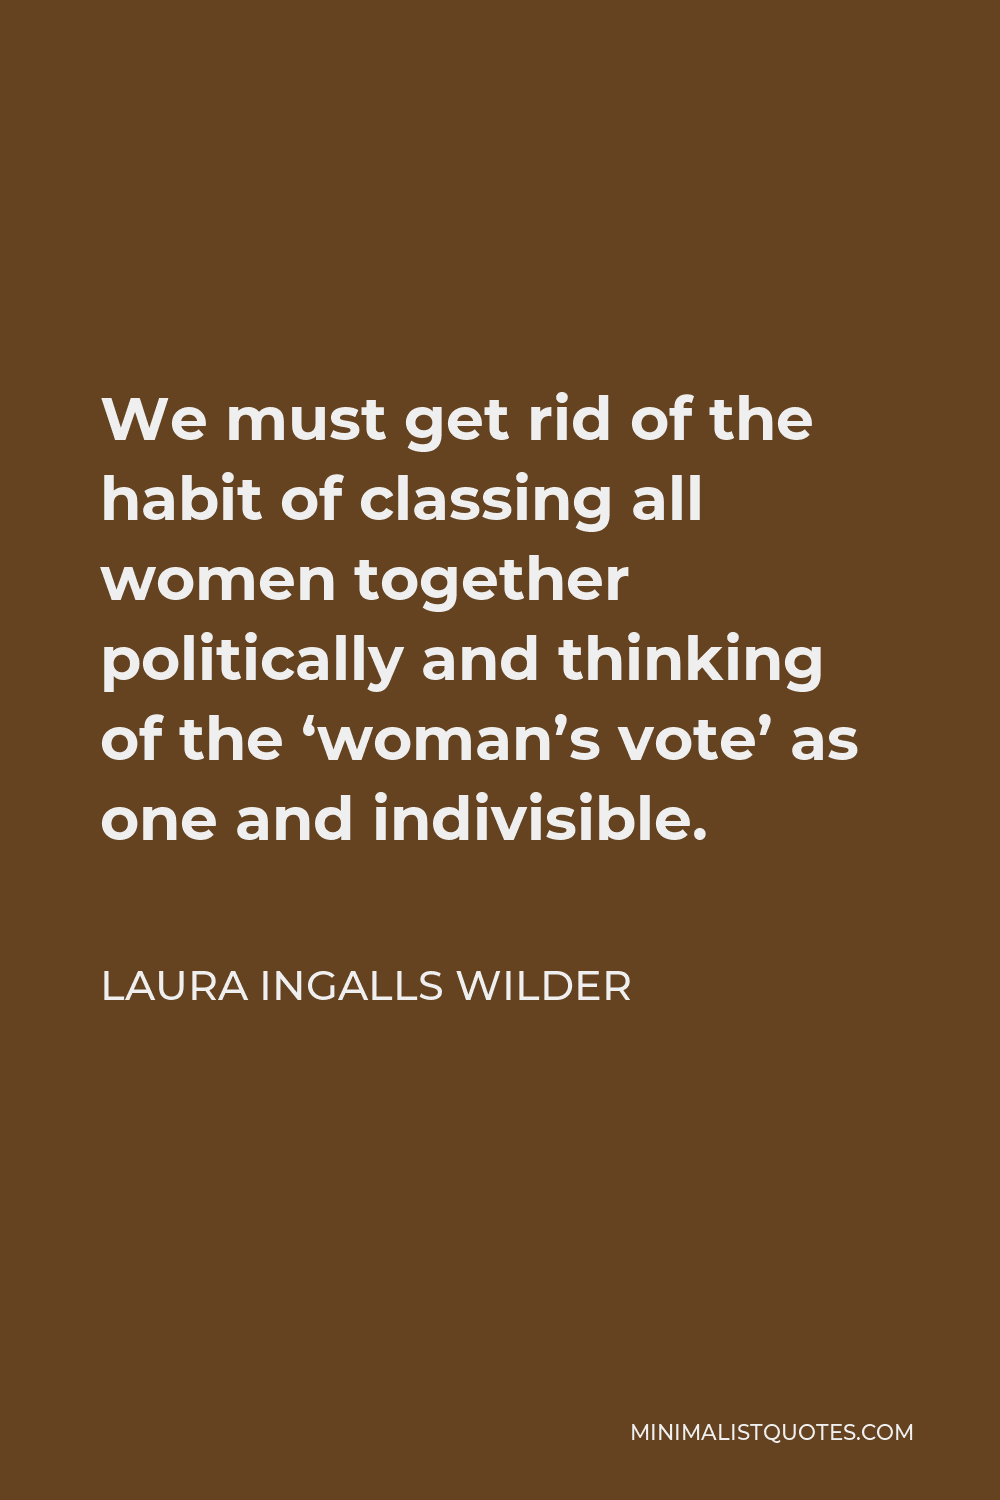 Laura Ingalls Wilder Quote - We must get rid of the habit of classing all women together politically and thinking of the ‘woman’s vote’ as one and indivisible.